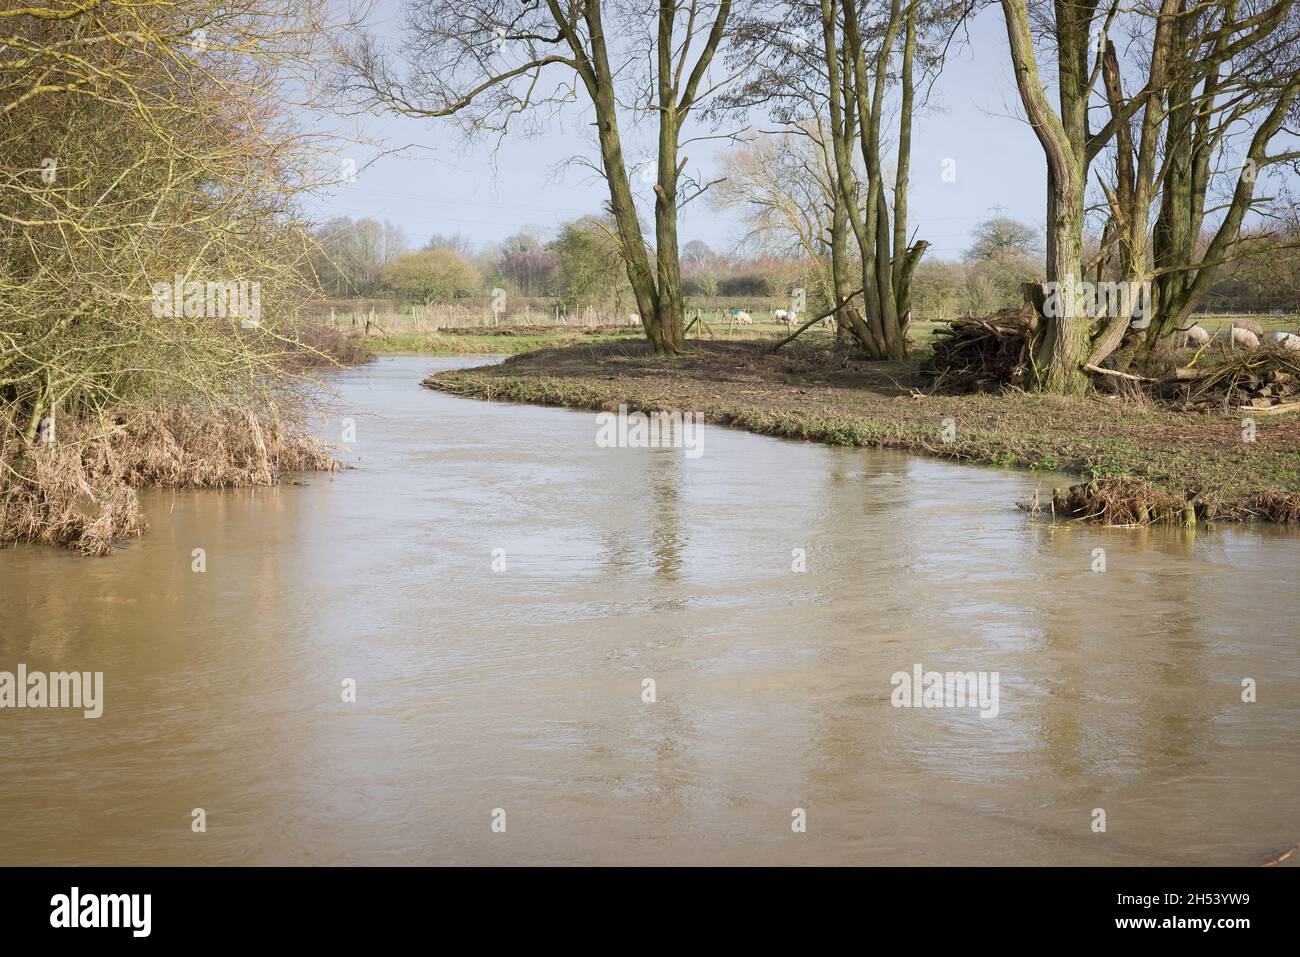 Swollen meandering river with high water level in countryside, Buckinghamshire, UK Stock Photo